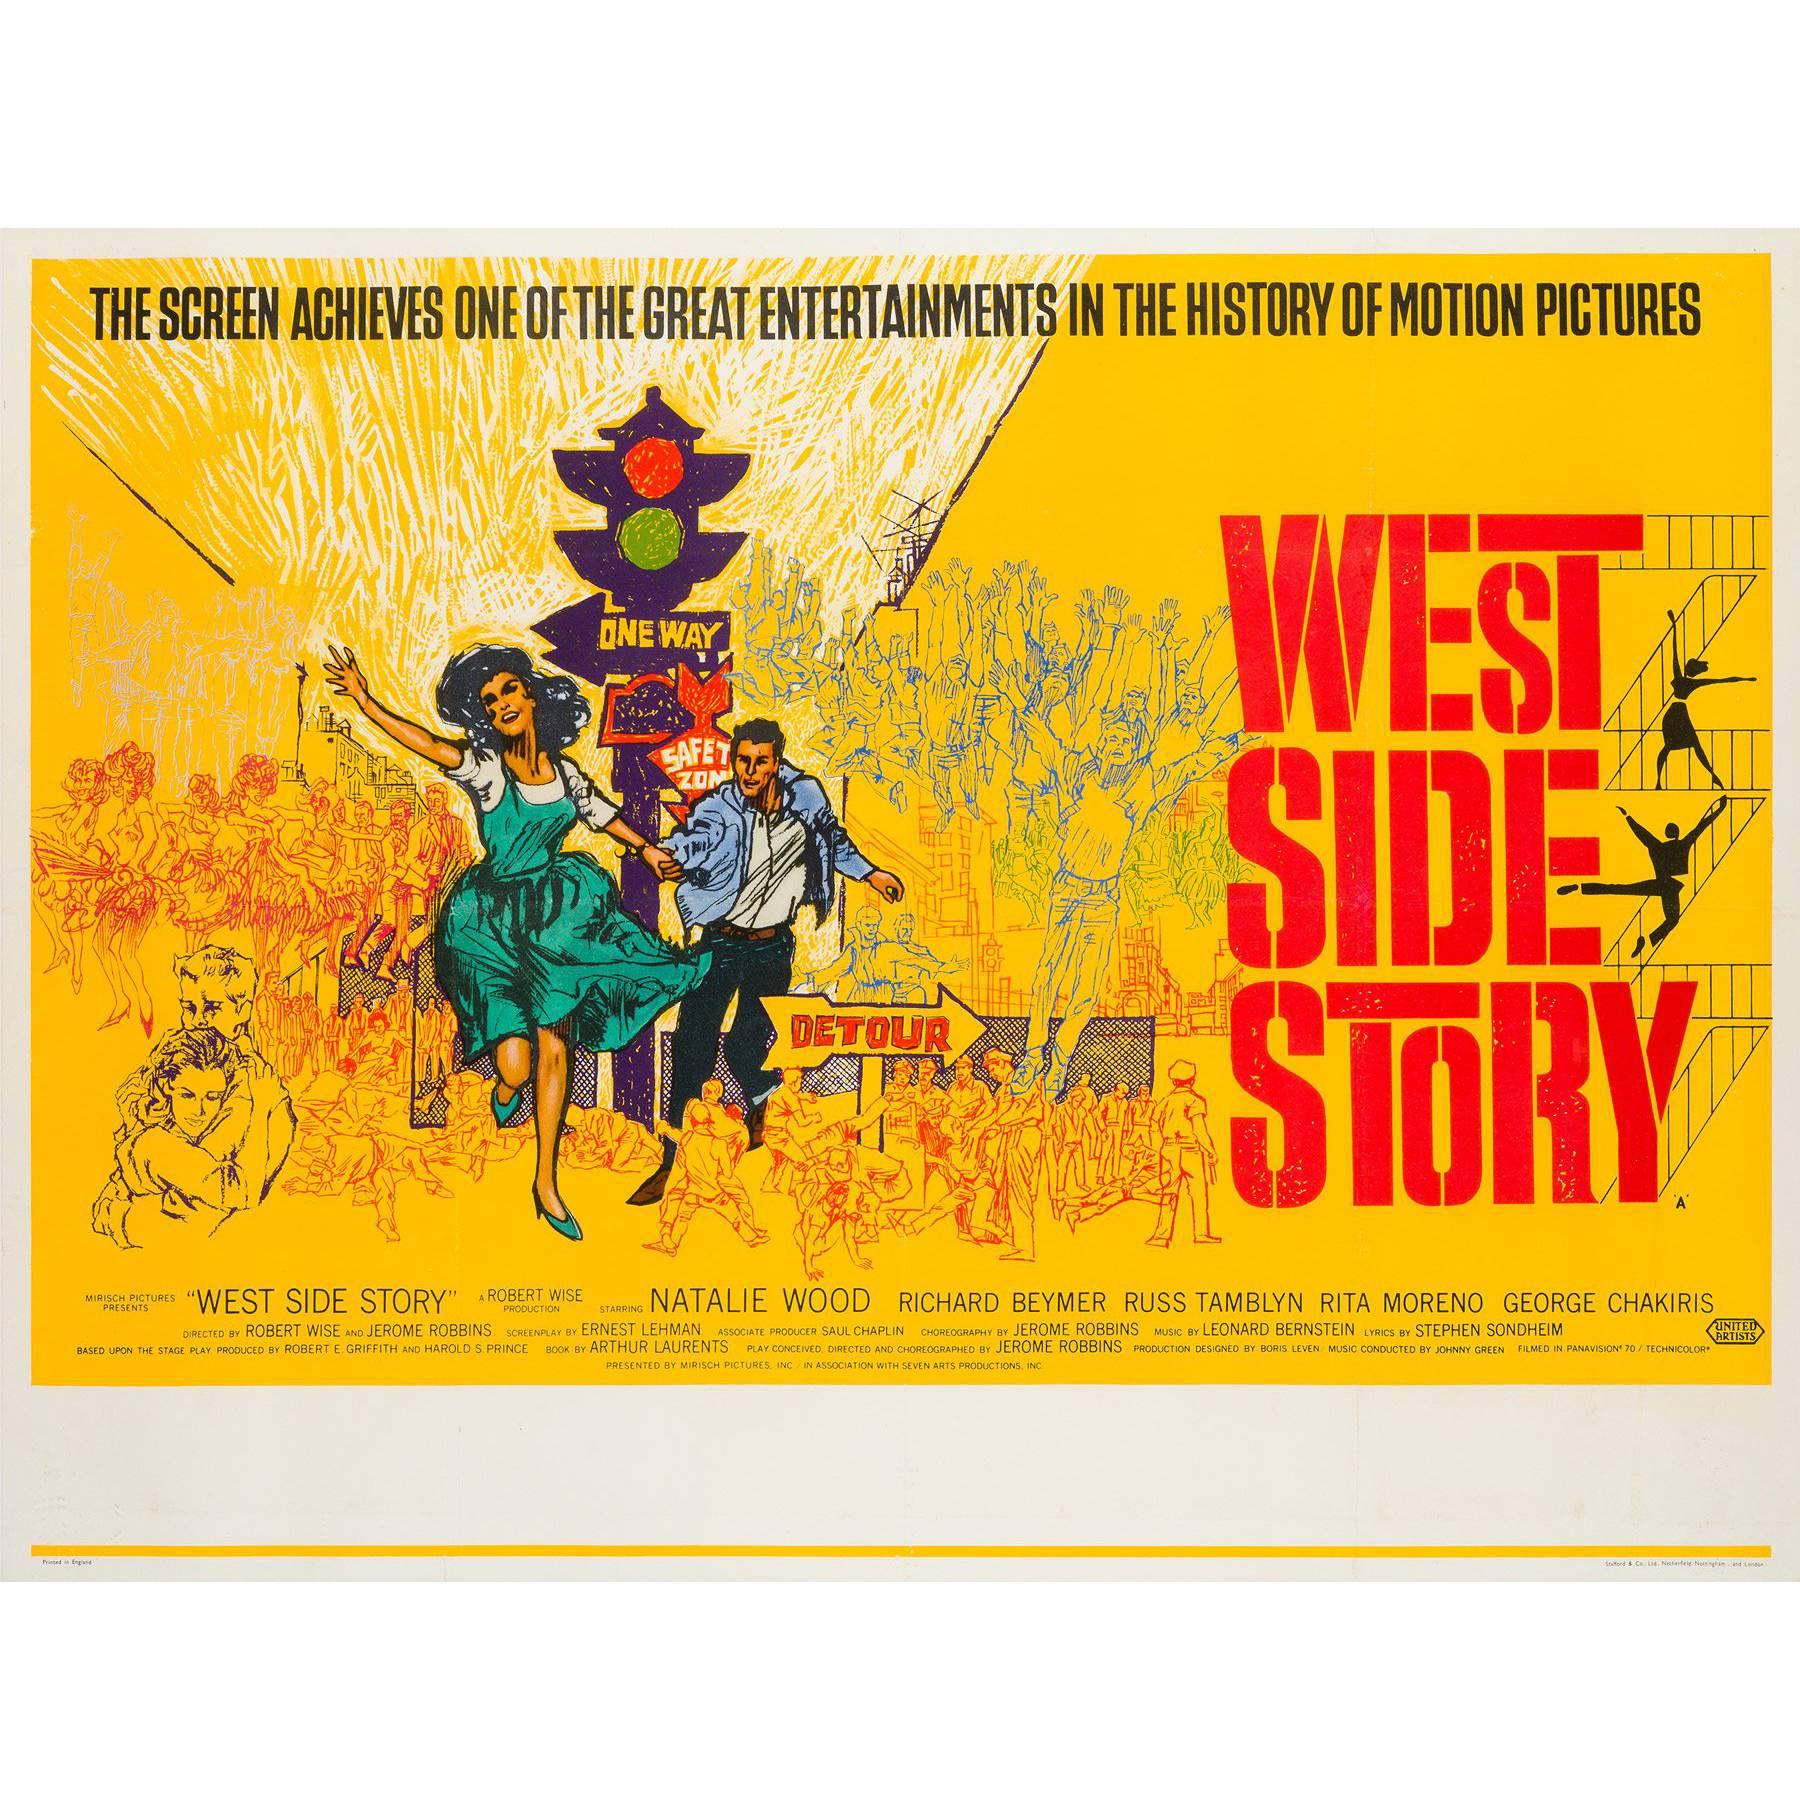 'West Side Story' UK Film Poster, Brian Bysouth, 1961